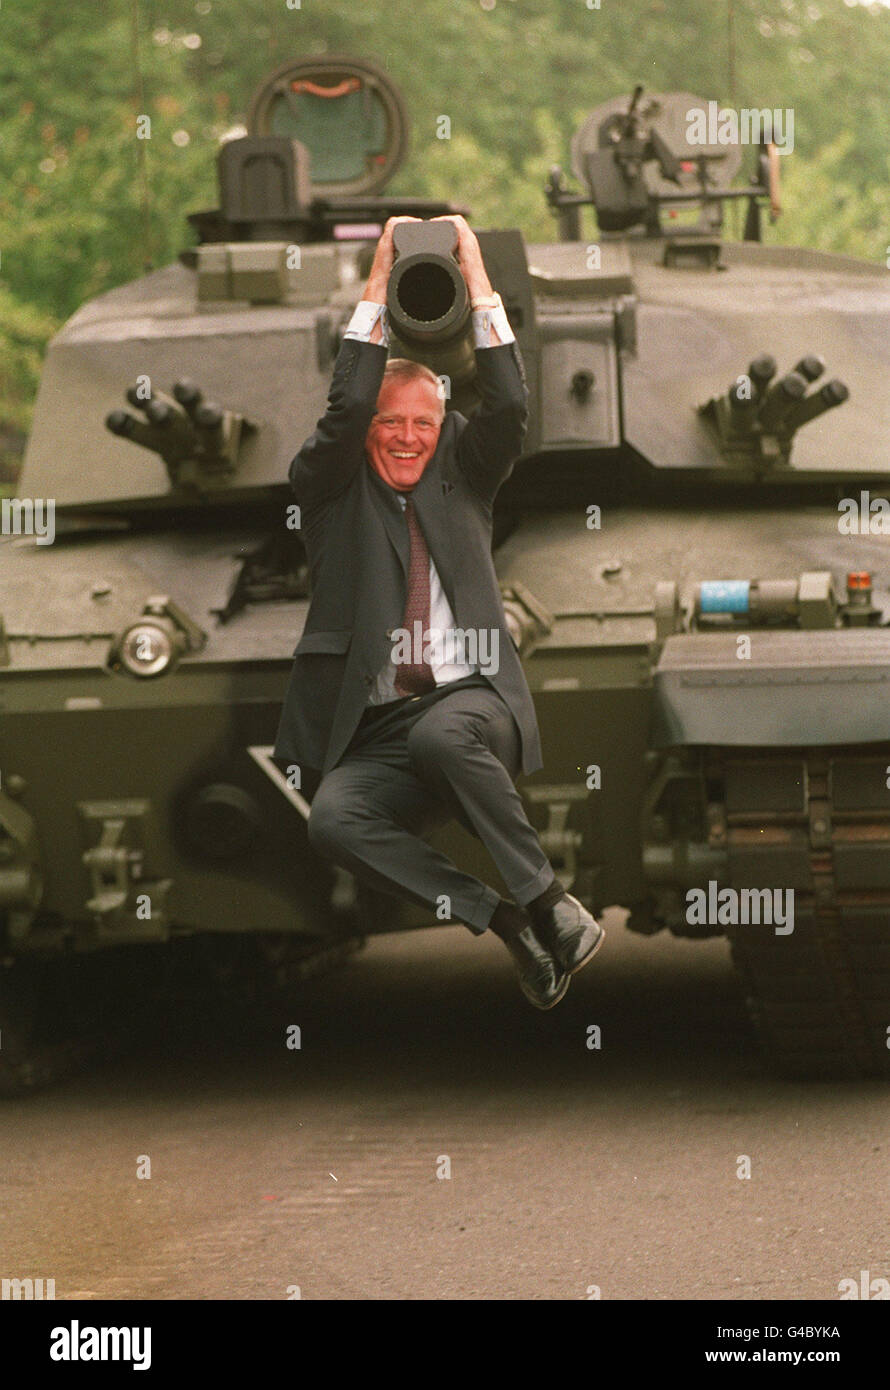 SIR COLIN CHANDLER, CHIEF EXECUTIVE OF VICKERS PLC, SHOWS HIS PLEASURE AFTER TAKING THE WRAPS OFF THE CHALLENGER 2 TANK AT CHELSEA BARRACKS IN LONDON. * 20/9/99 It was announced that aero-engines company Rolls-Royce had made an agreed cash offer of 576 million for the Vickers engineering group. As well as defence systems, Vickers also has marine and turbine divisions. Stock Photo